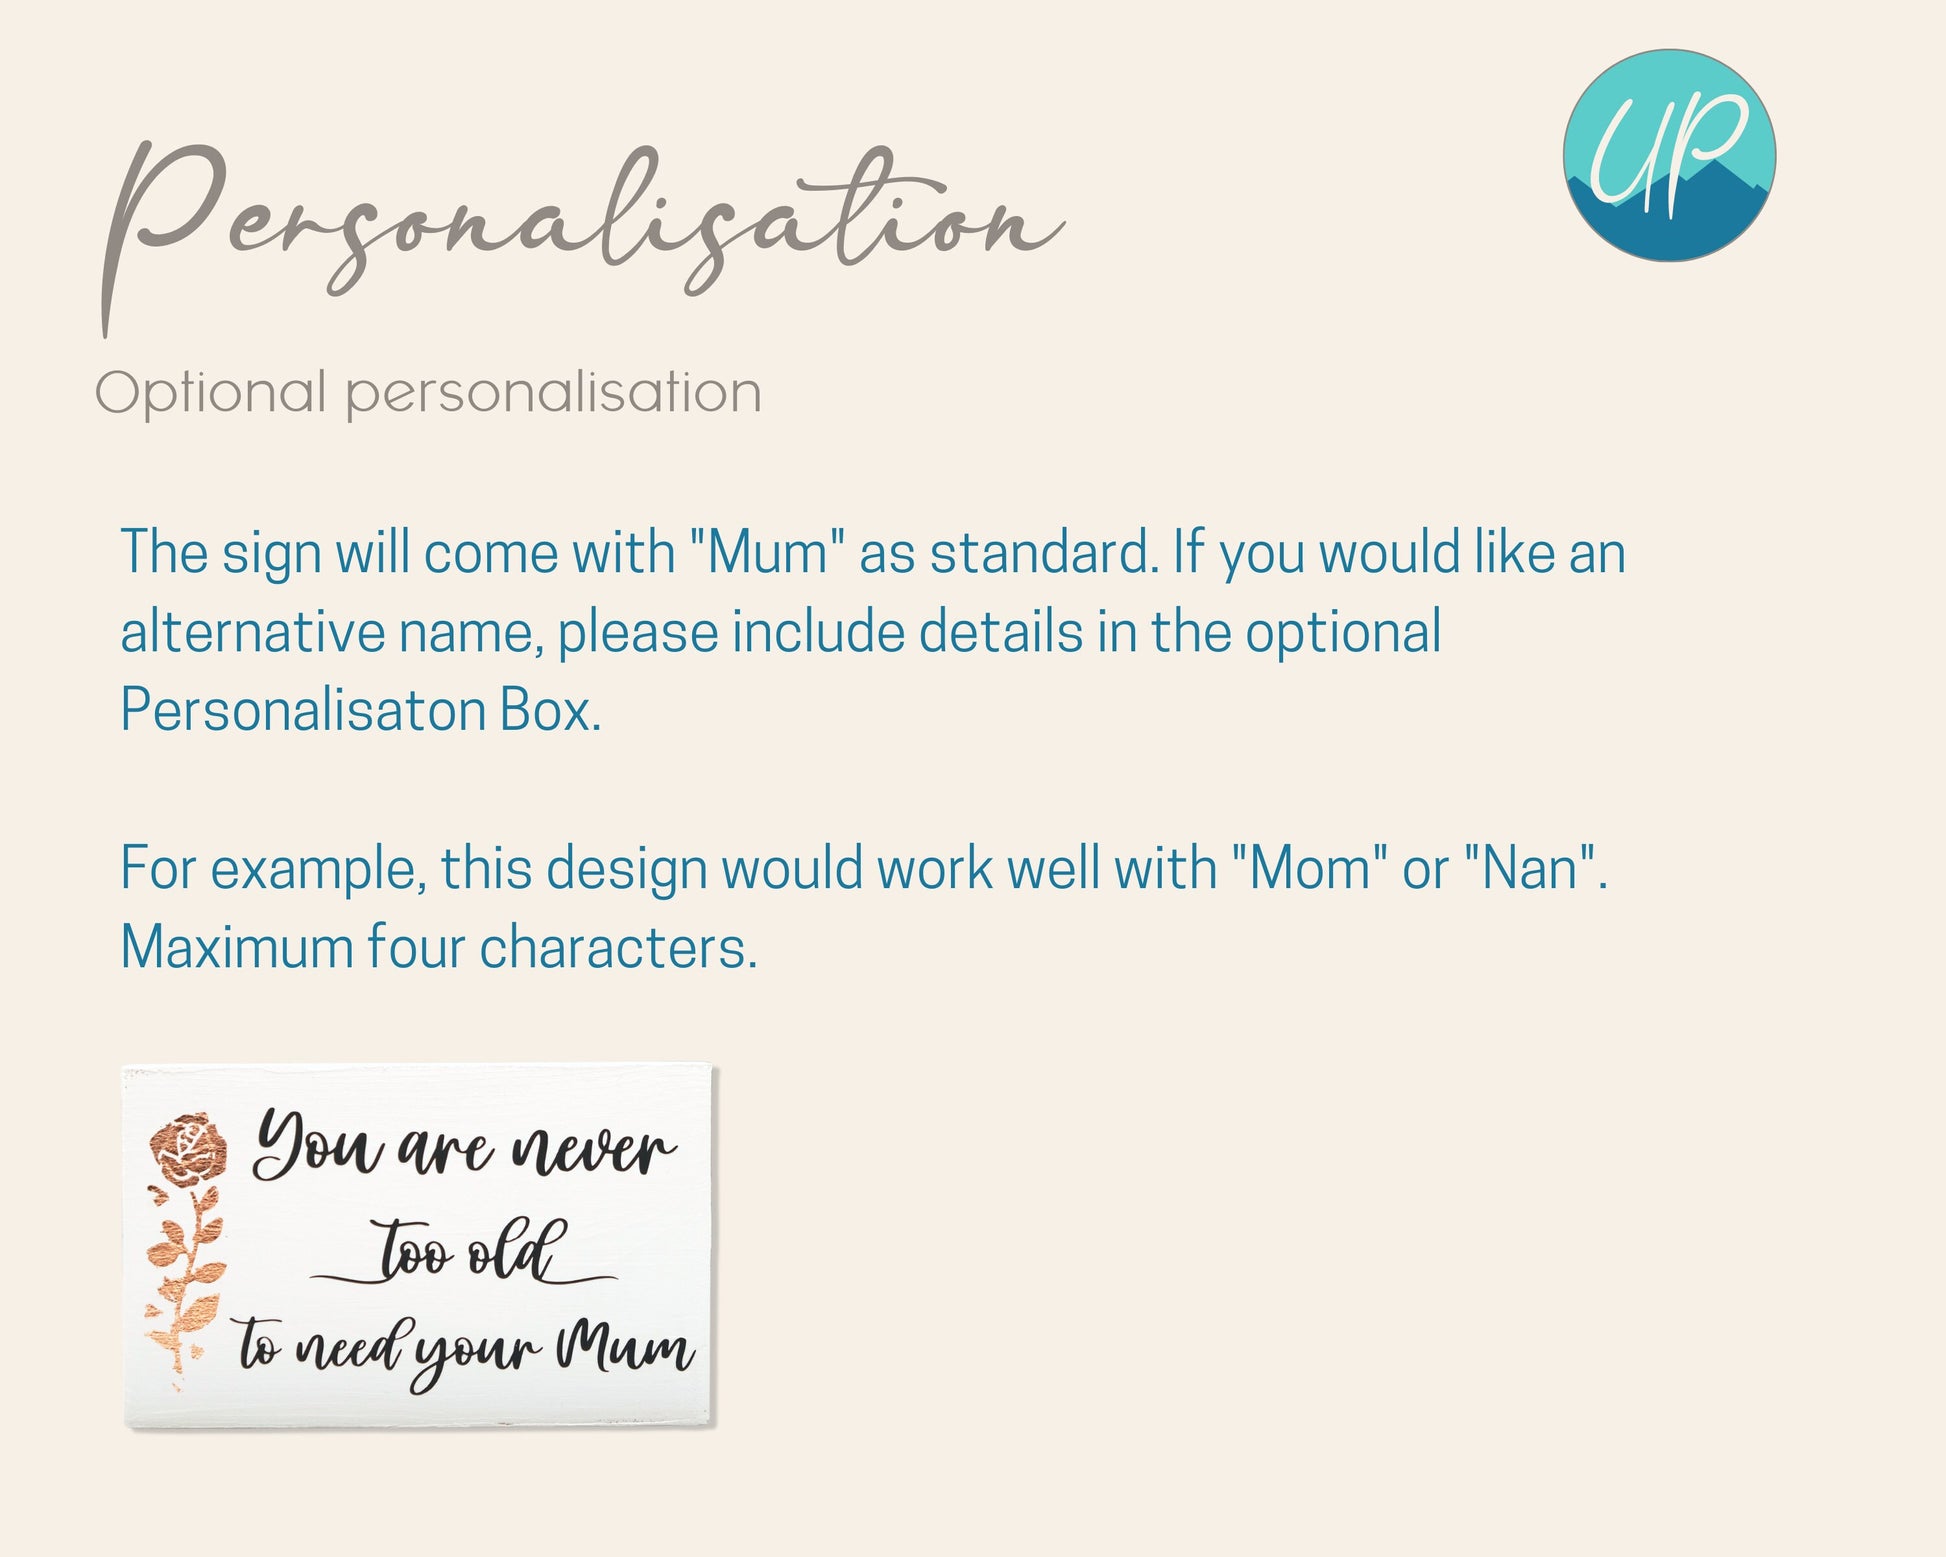 Light colored information page with brand logo and small wooden sign, providing information on optional personalization. Can change the word, Mum, to a alternative spelling or other word such as, Nan, up to 4 characters.